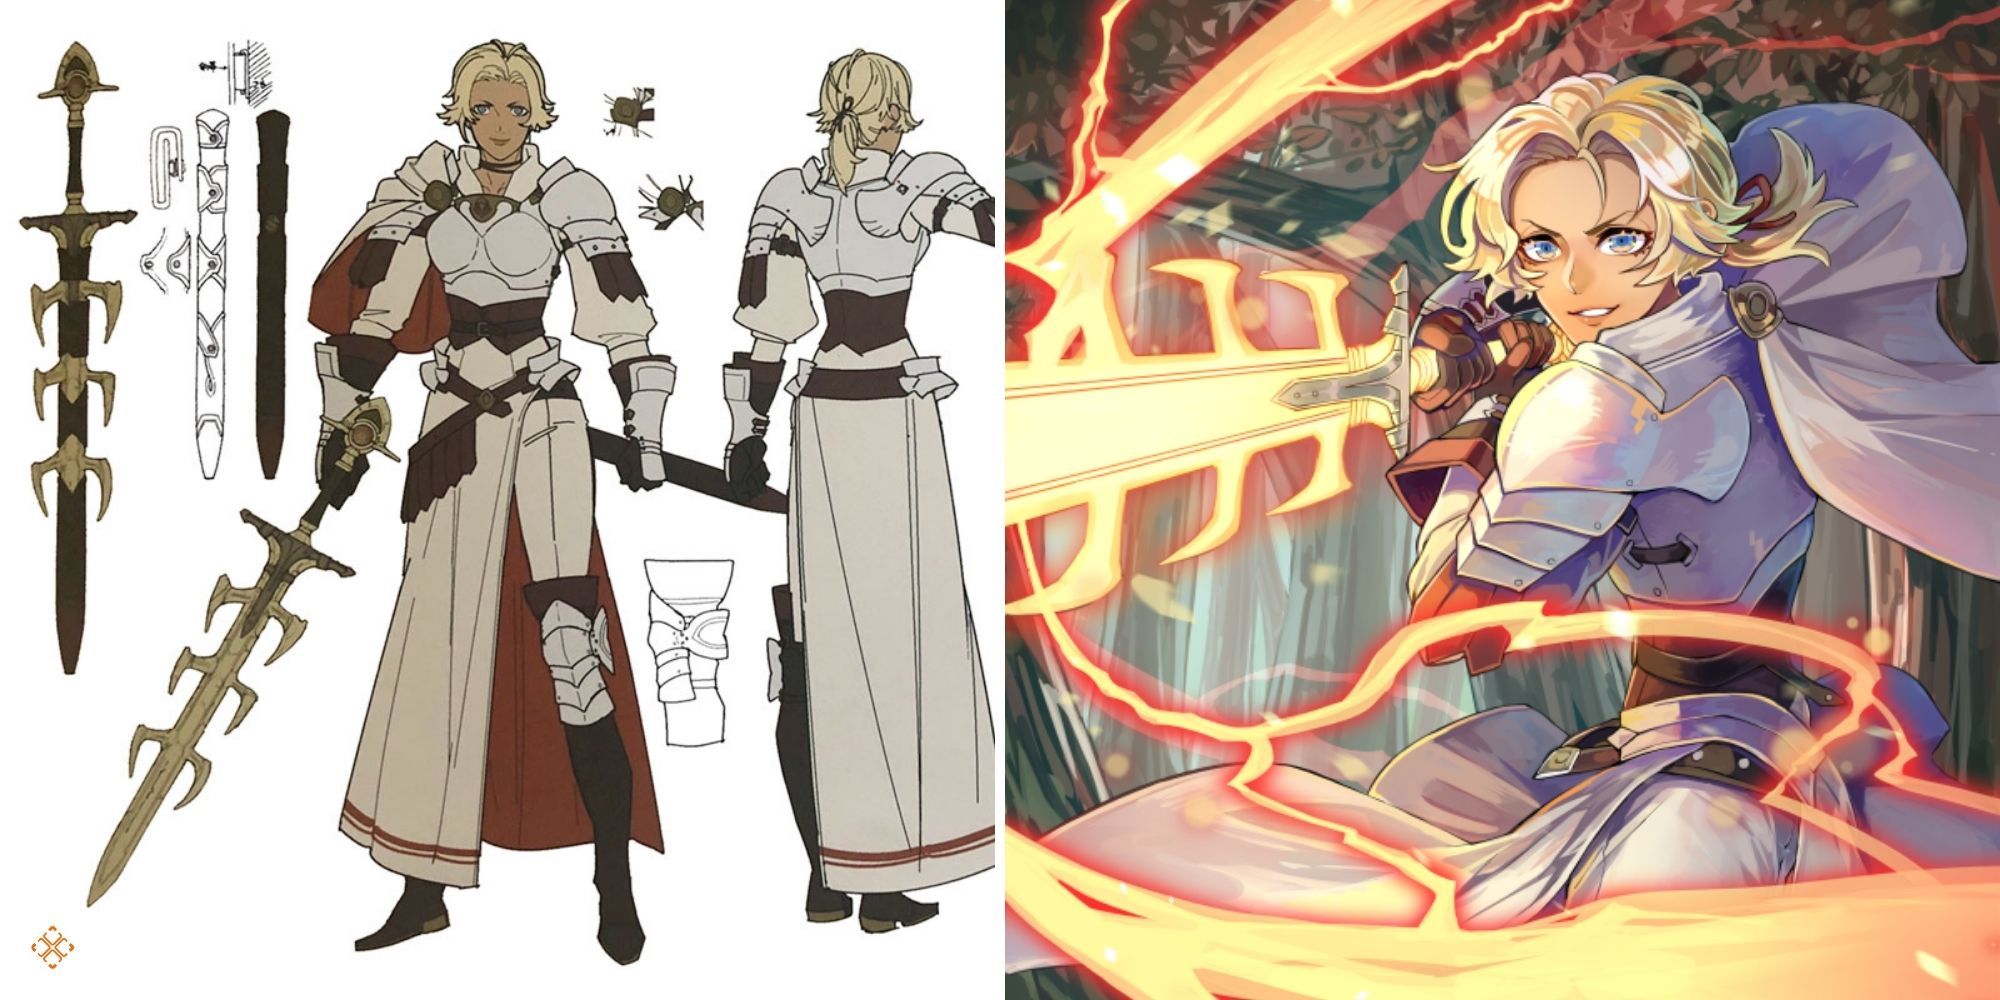 Fire Emblem Three Houses - Thunderbrand and Catherine official art on left, Catherine holding the relic in official art on right